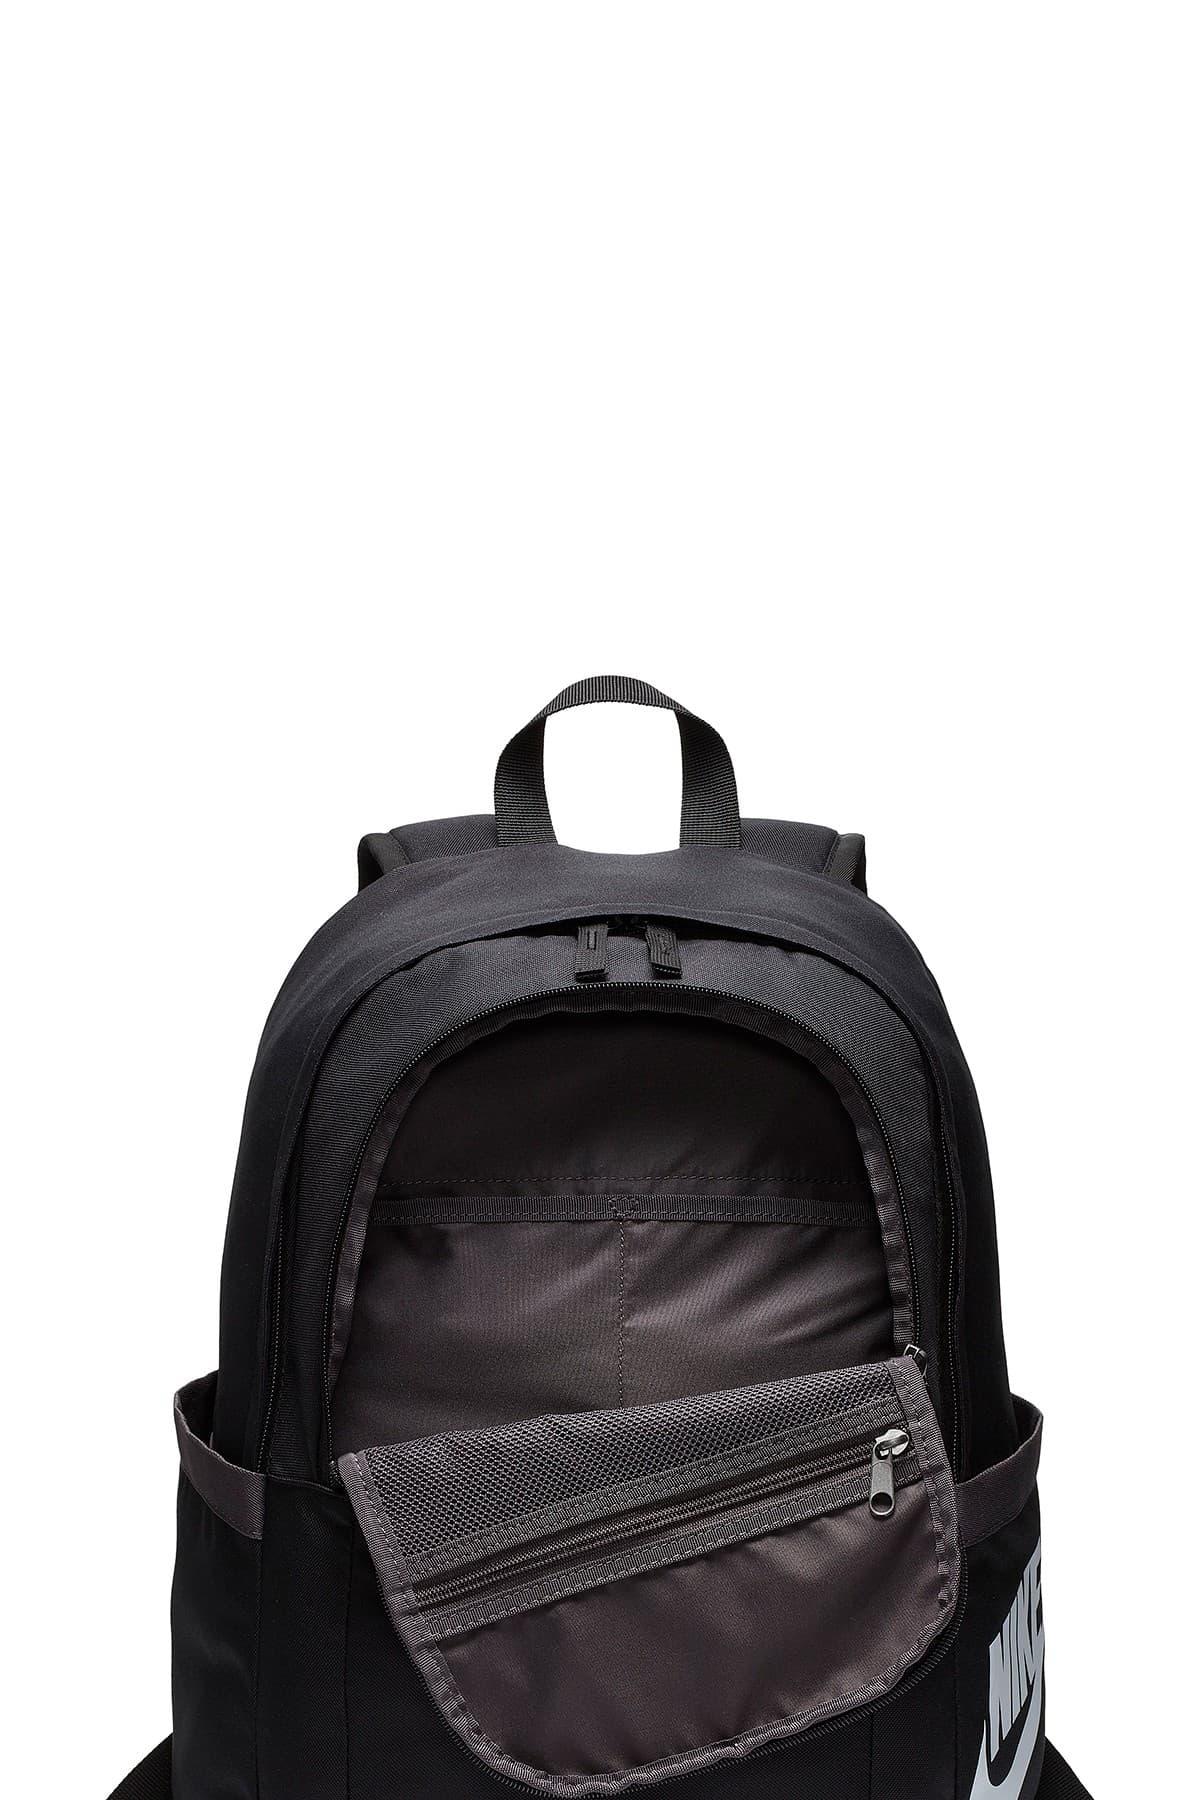 Nike All Access Soleday Backpack in Black Lyst